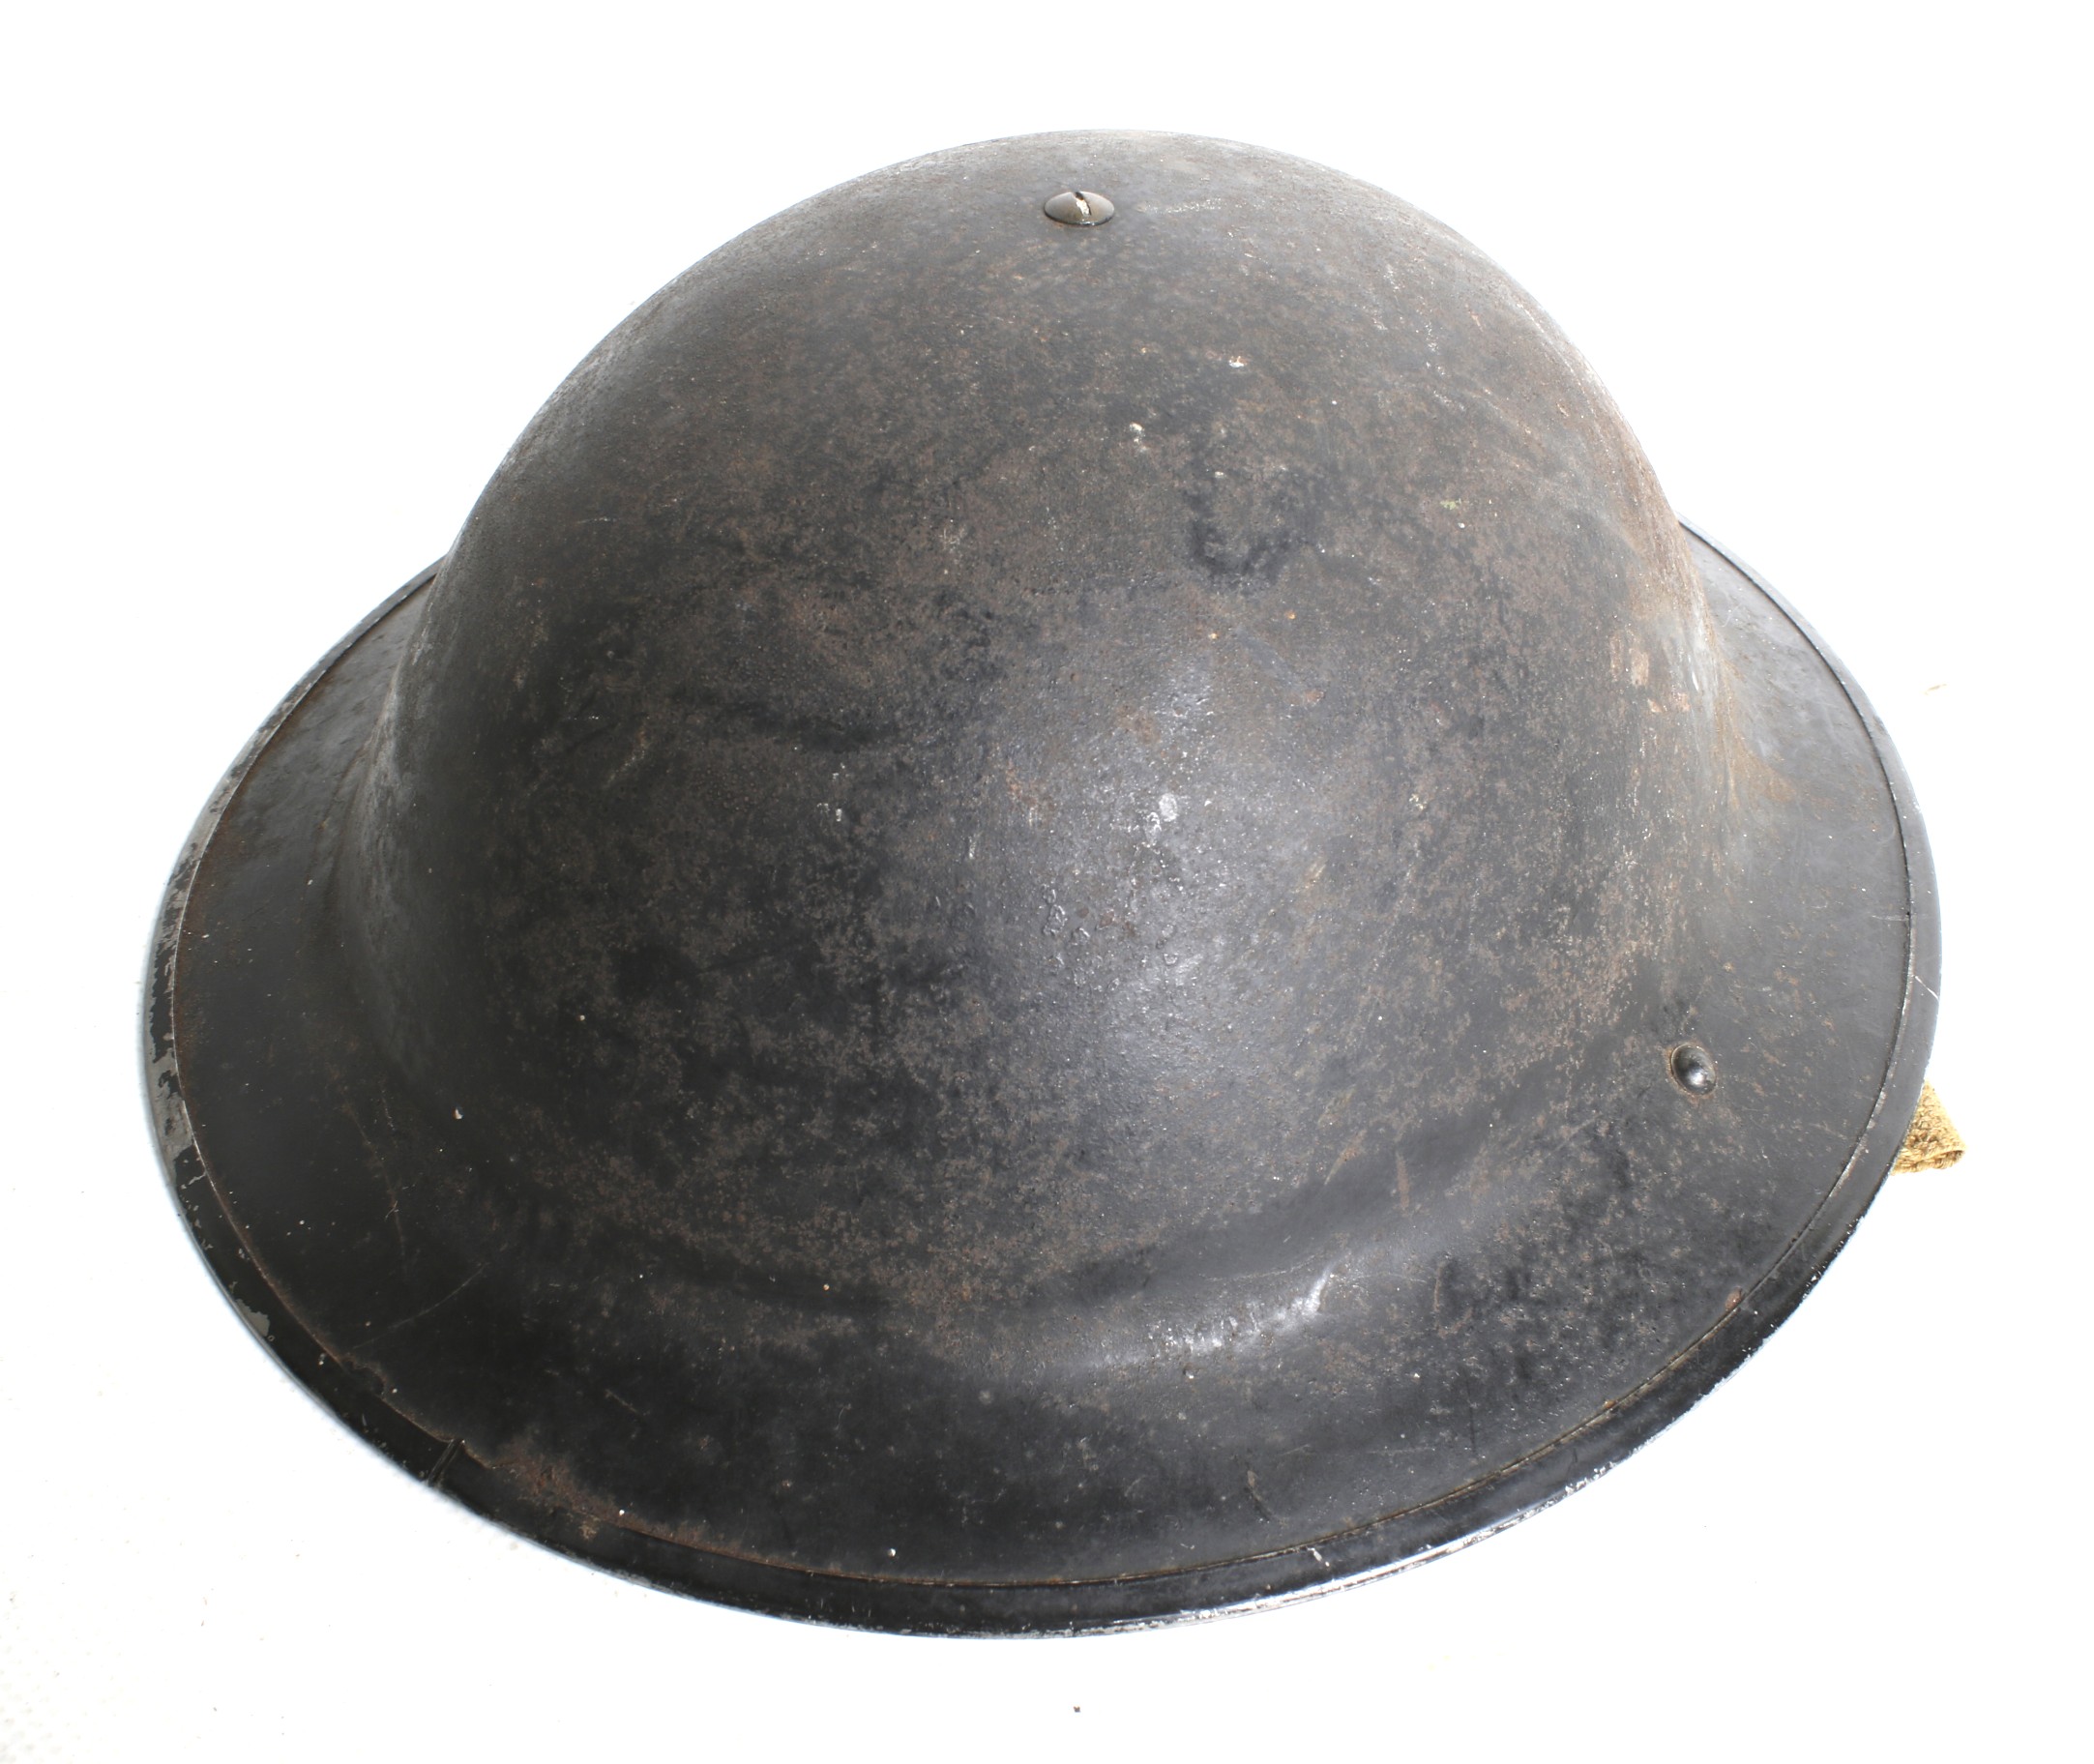 A WWII Brodie helmet, dated 1943.